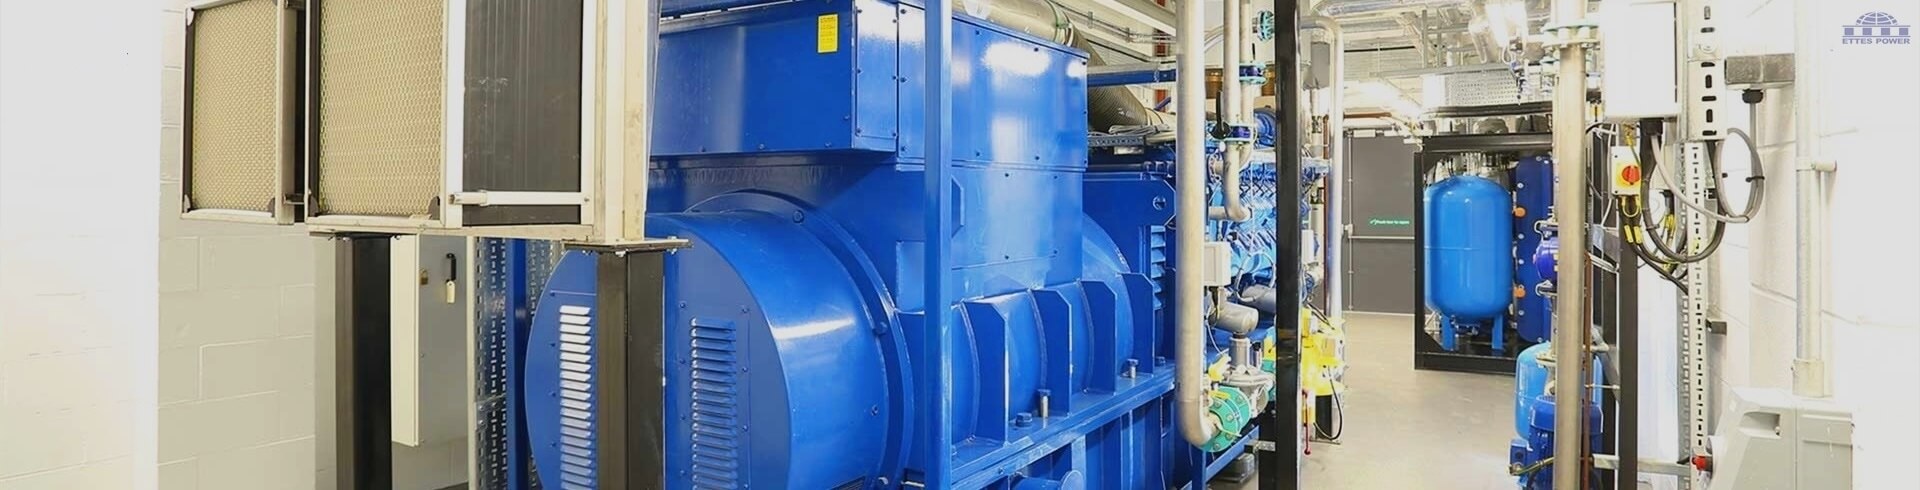 MWM 1000kW 1MW biogas engine generator combined heat and power CHP ETTES POWER